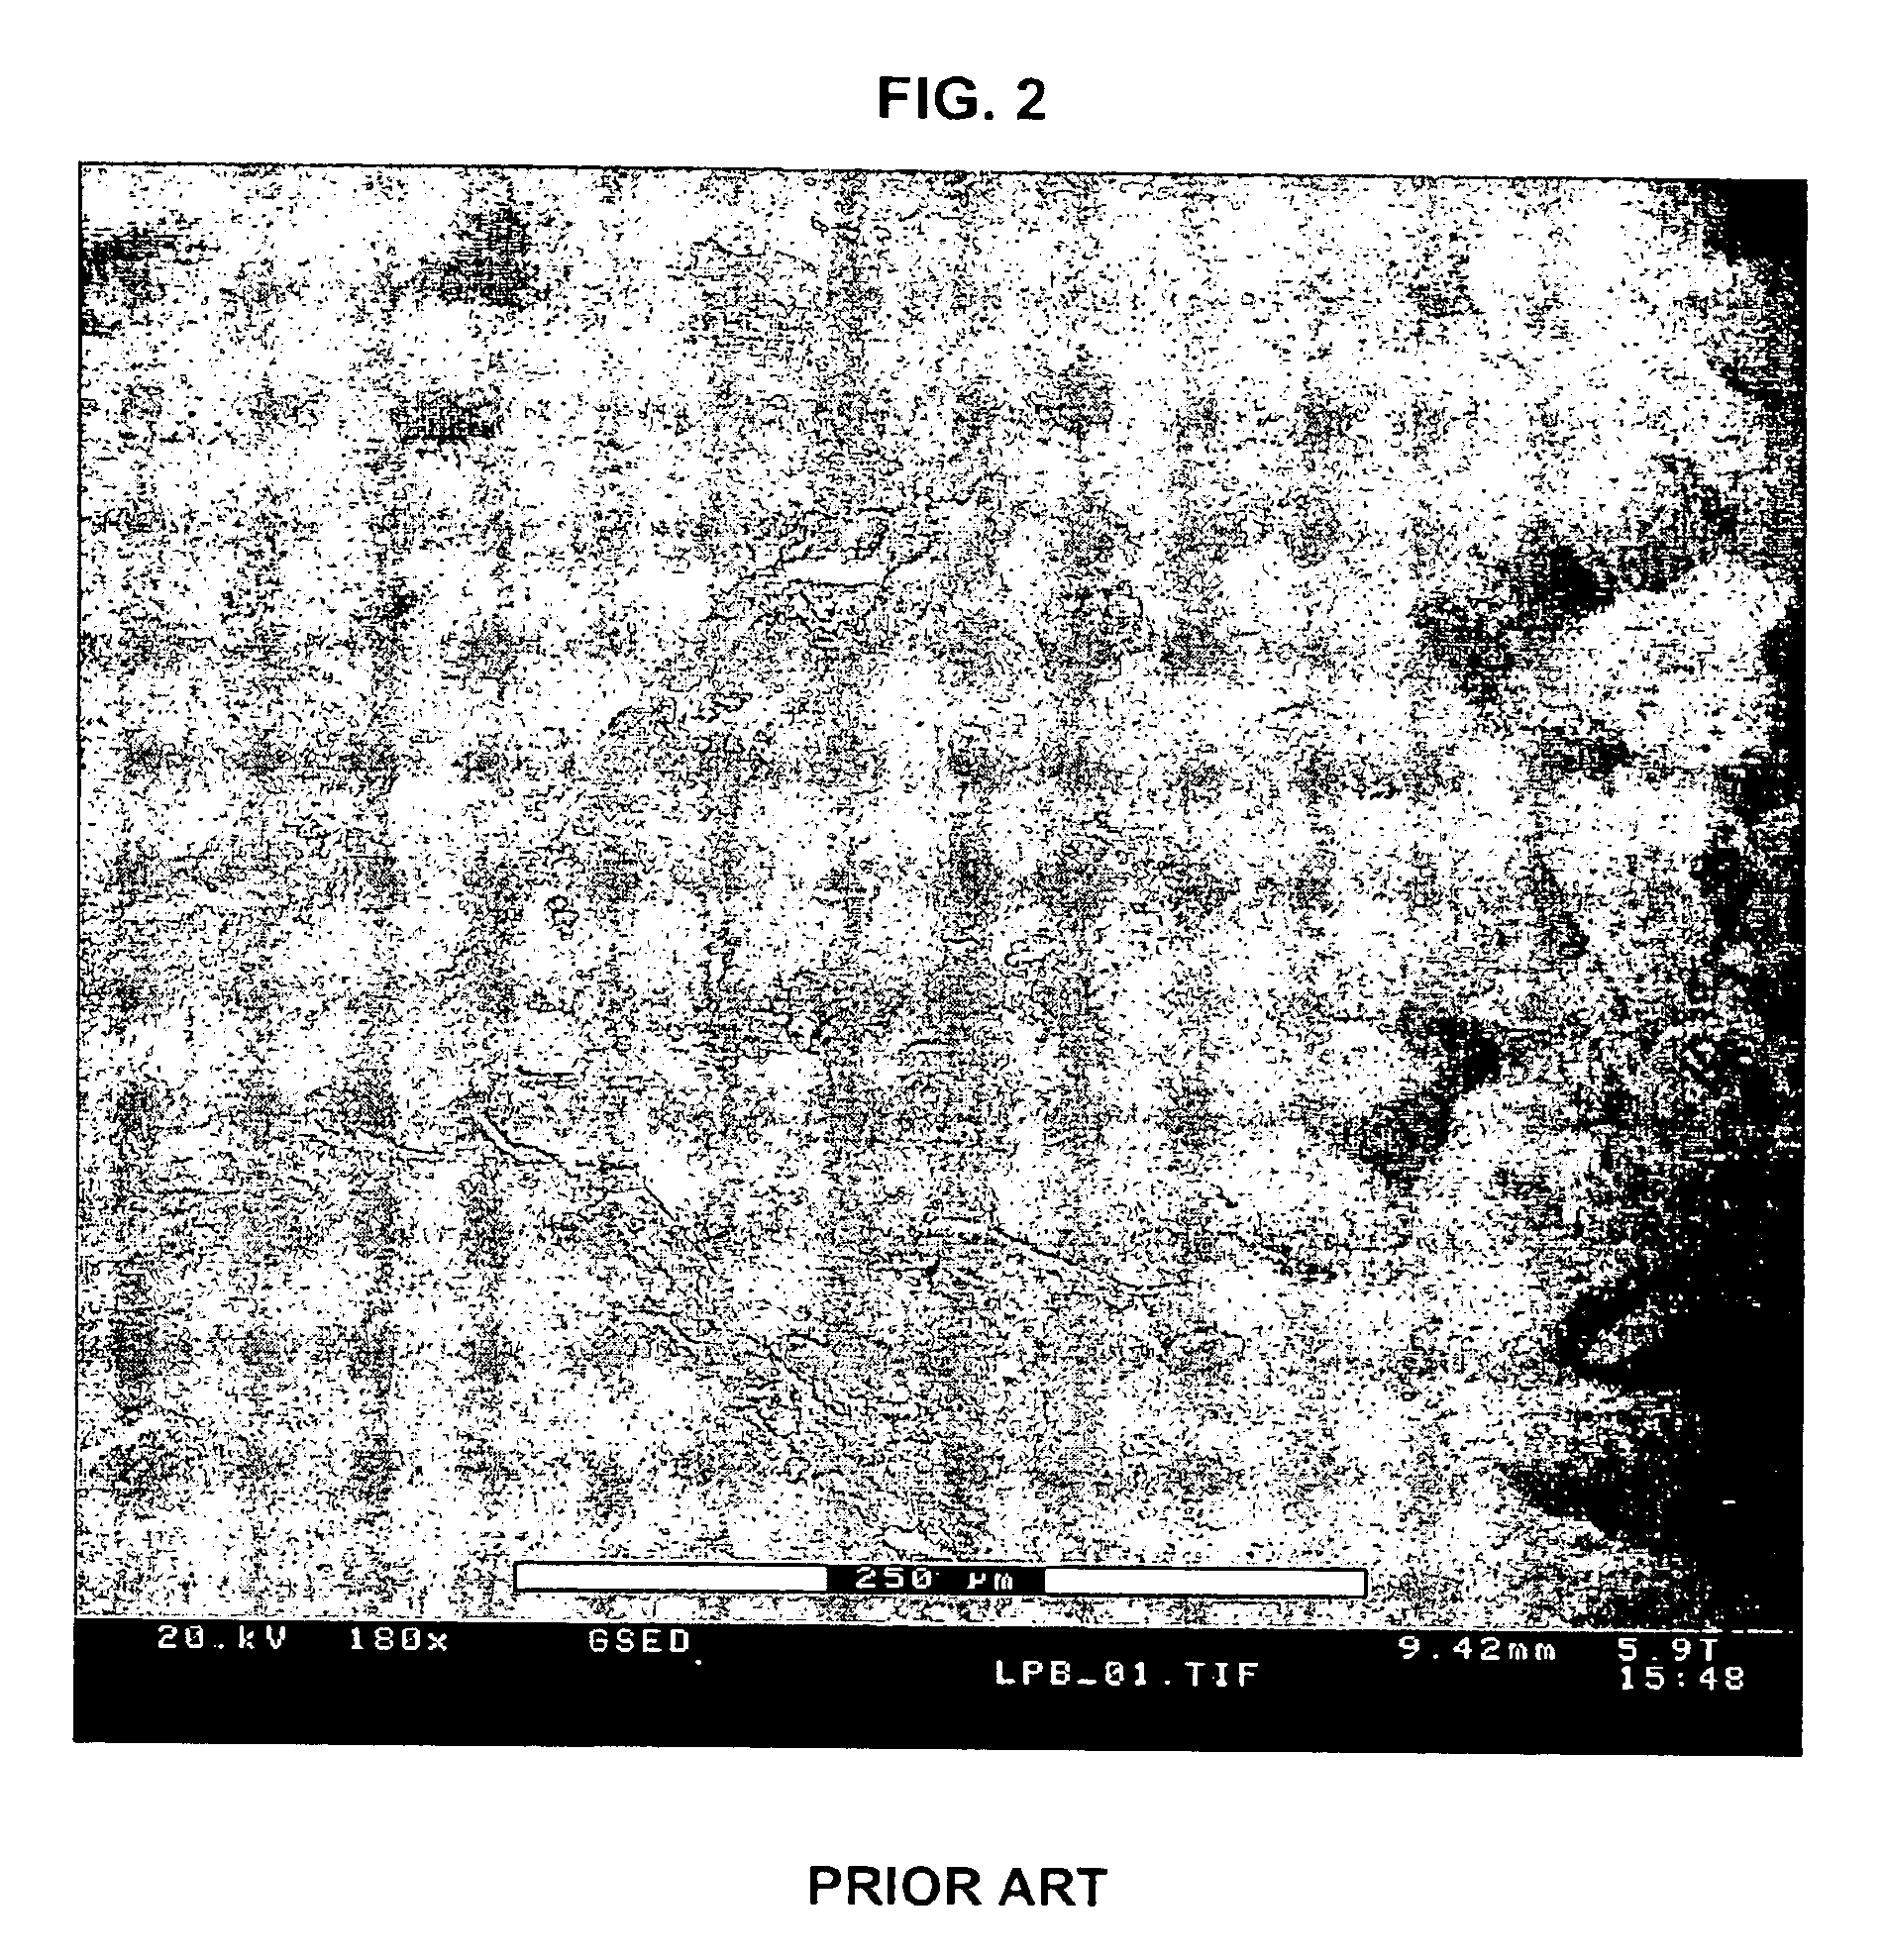 Calcium sulphate-based composition and methods of making same